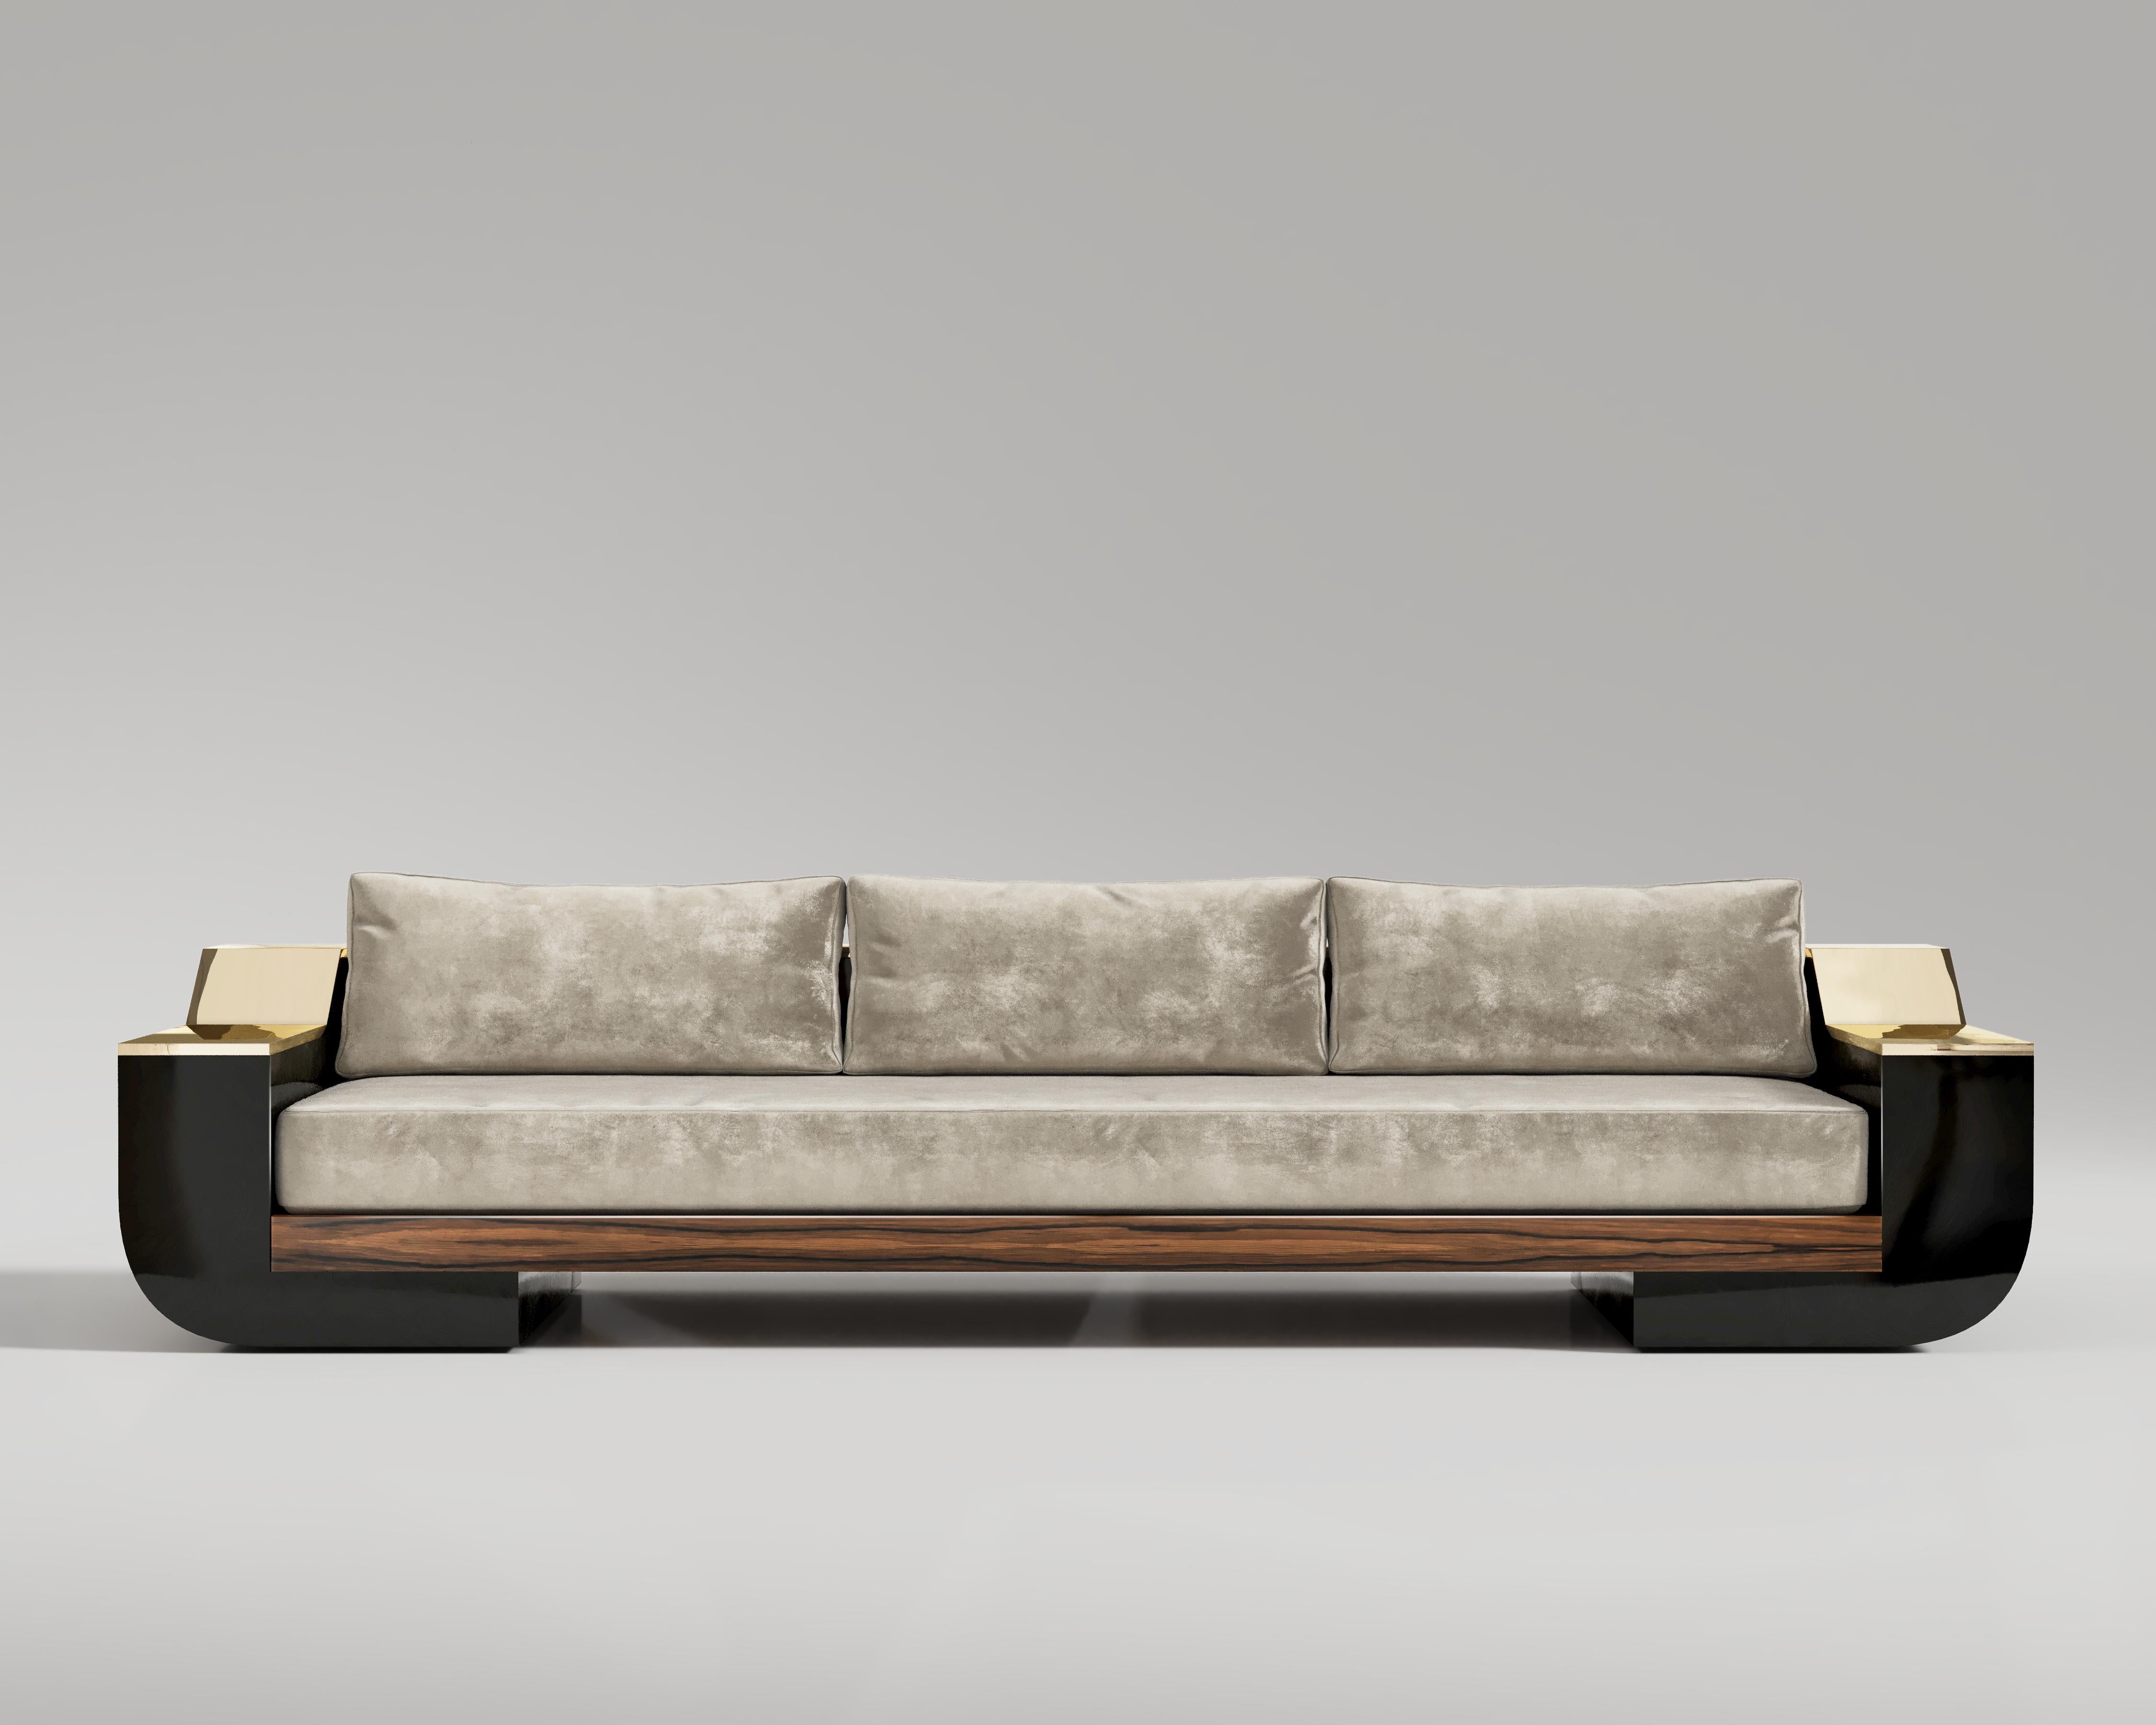 Meilleur Nom Sofa

Join us in discovering the Palena Furniture paradise, with each item narrating its story of elegance and gentleness. Let’s delve into the meanings of the Meilleur Nom Sofa, just not a sofa to sit on, but more so, it’s the